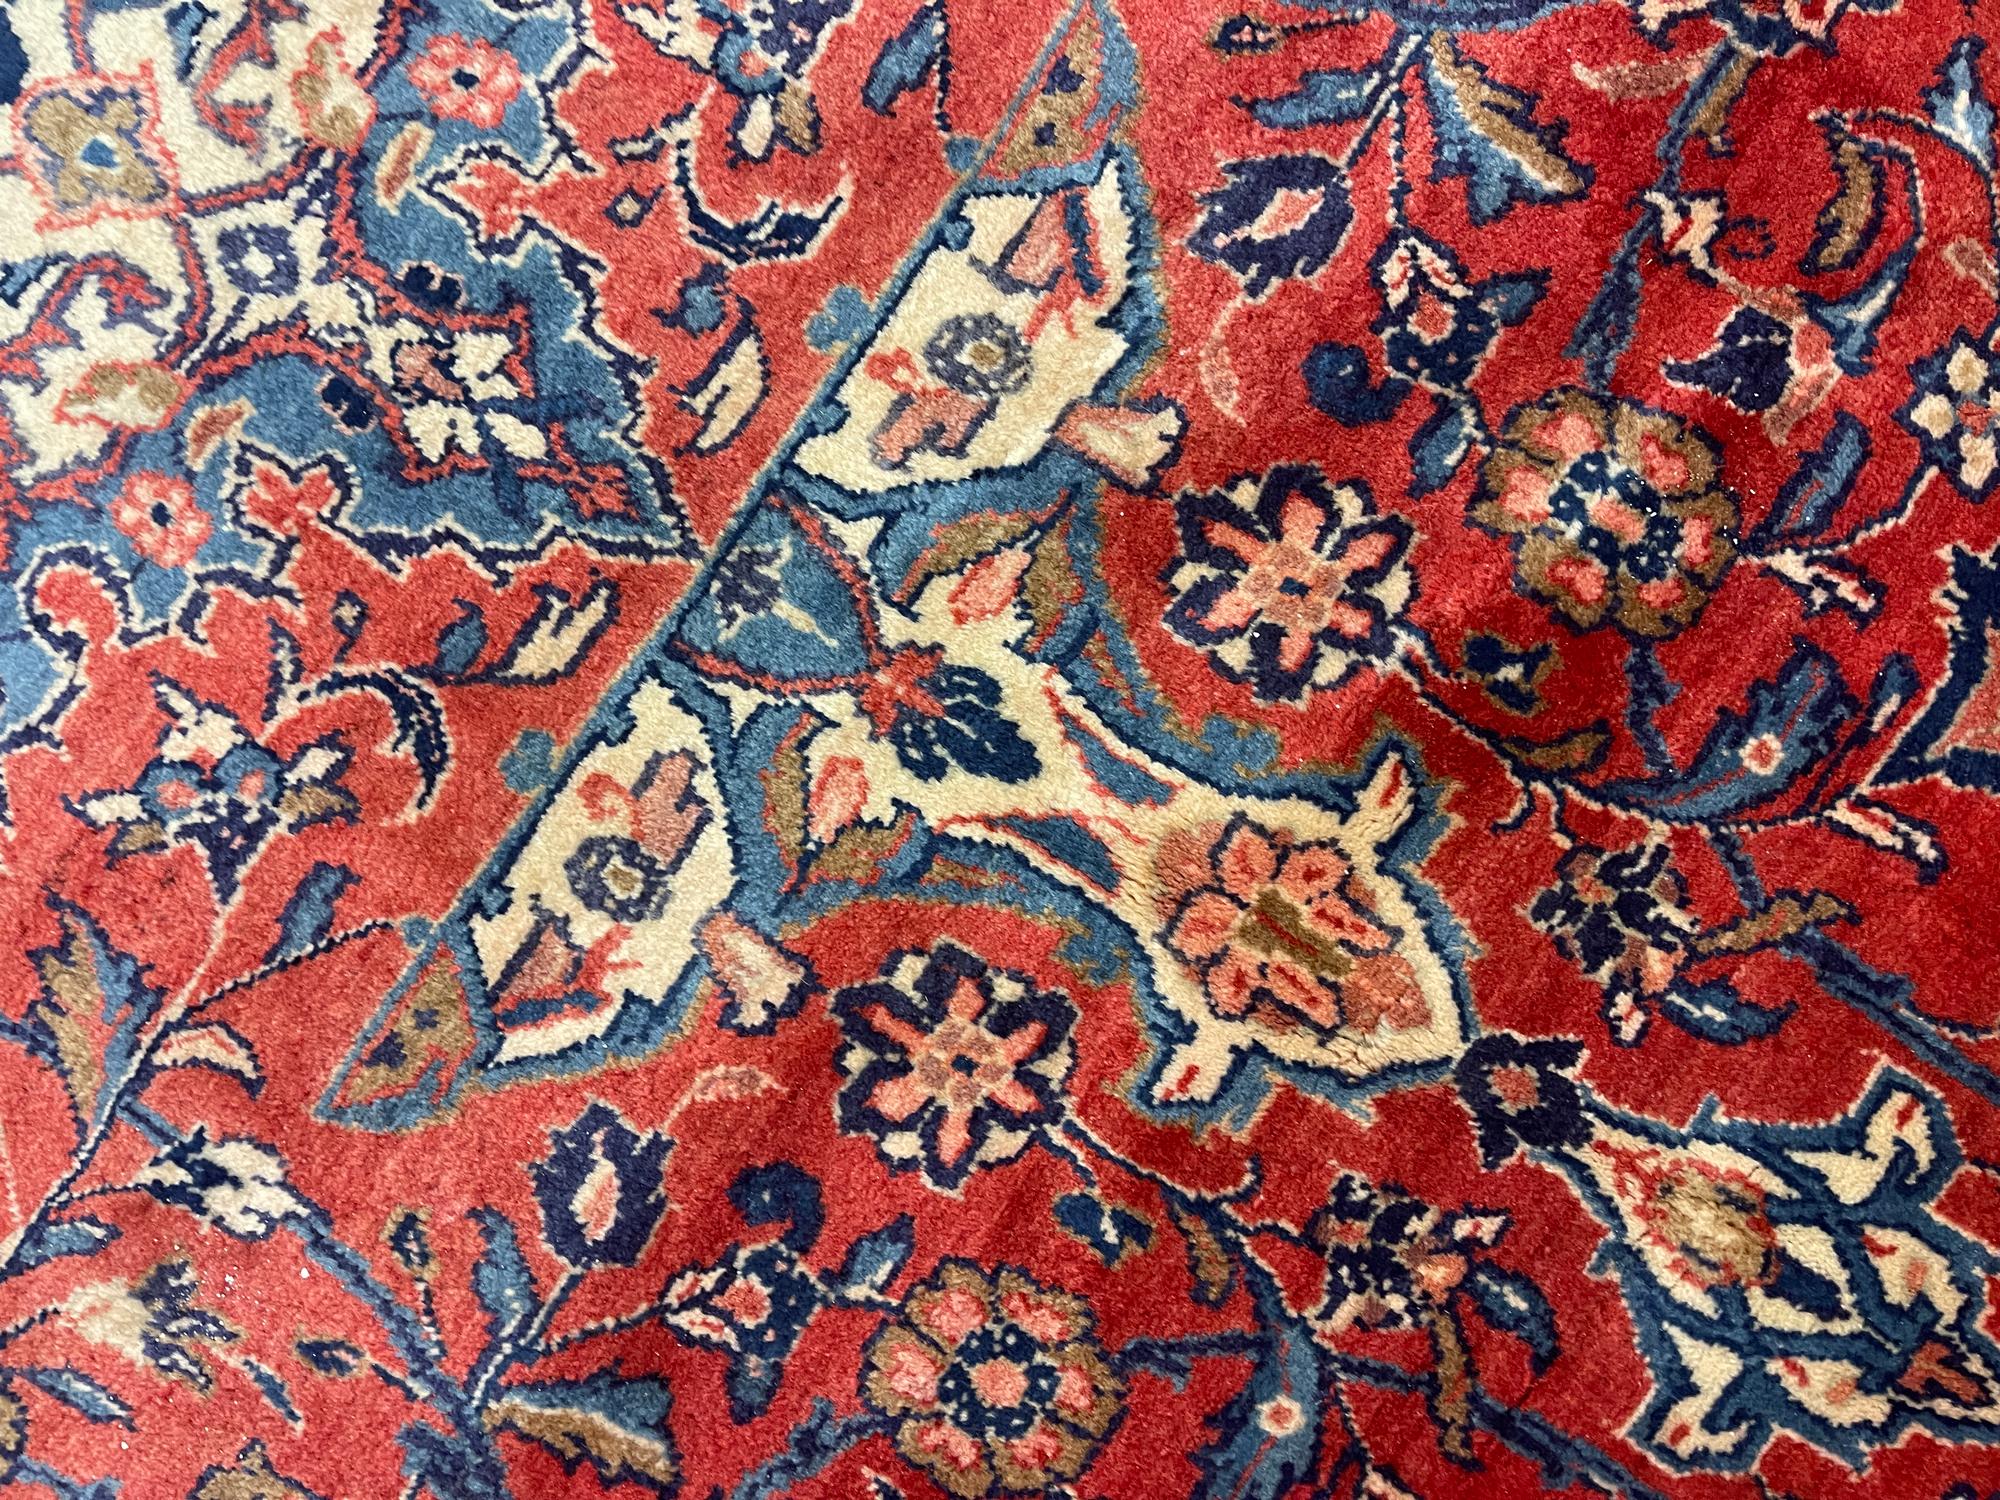 Oriental Carpet Wool Rugs Rust Large Vintage Livingroom Rugs for Sale In Excellent Condition For Sale In Hampshire, GB